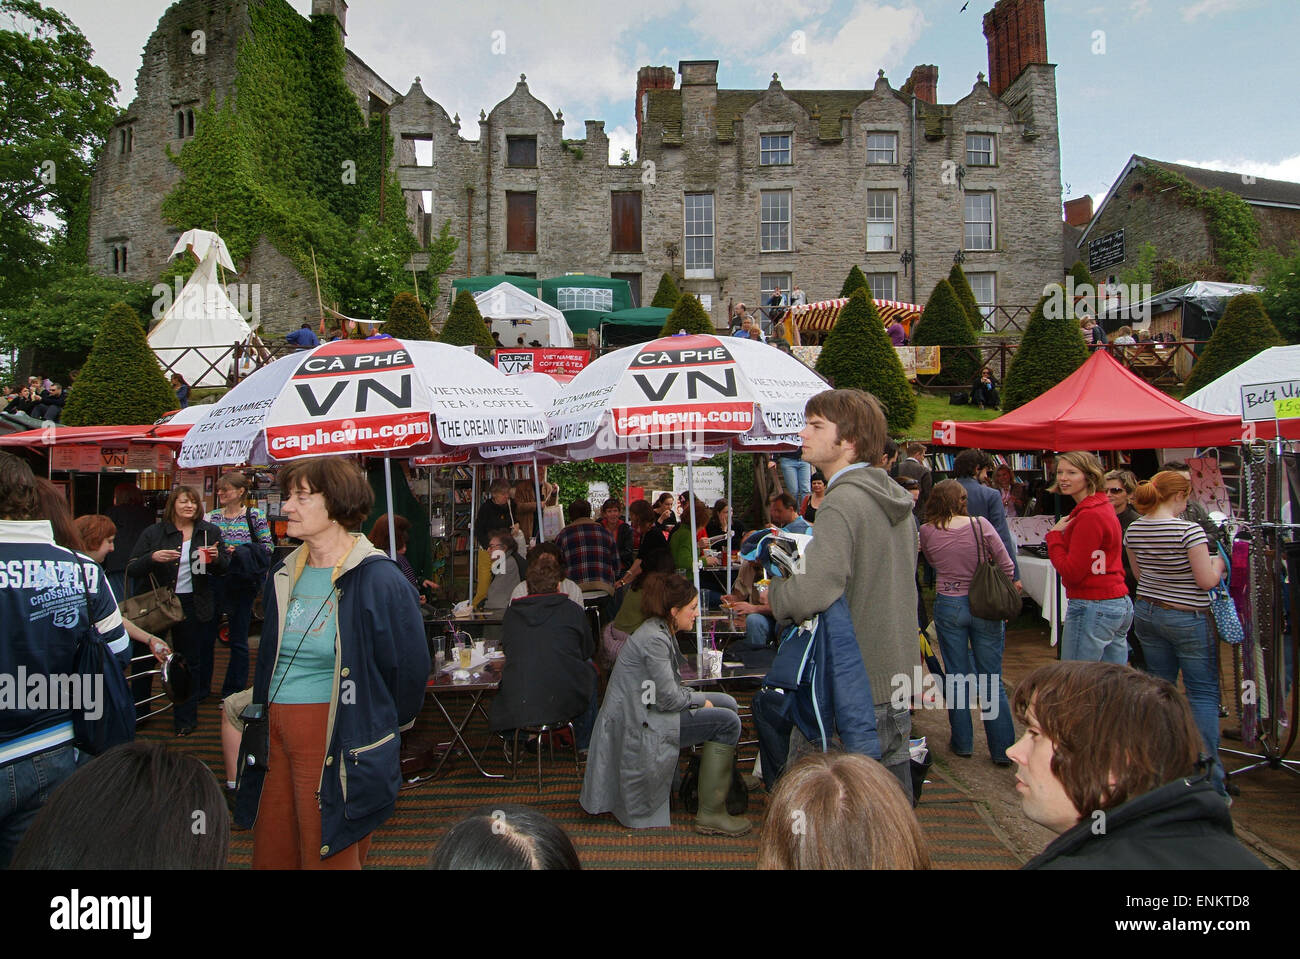 Hay-on-Wye, Powys, Wales, UK, home of the annual Hay Festival, a book festival, showing Hay Castle in the centre of the town. Stock Photo